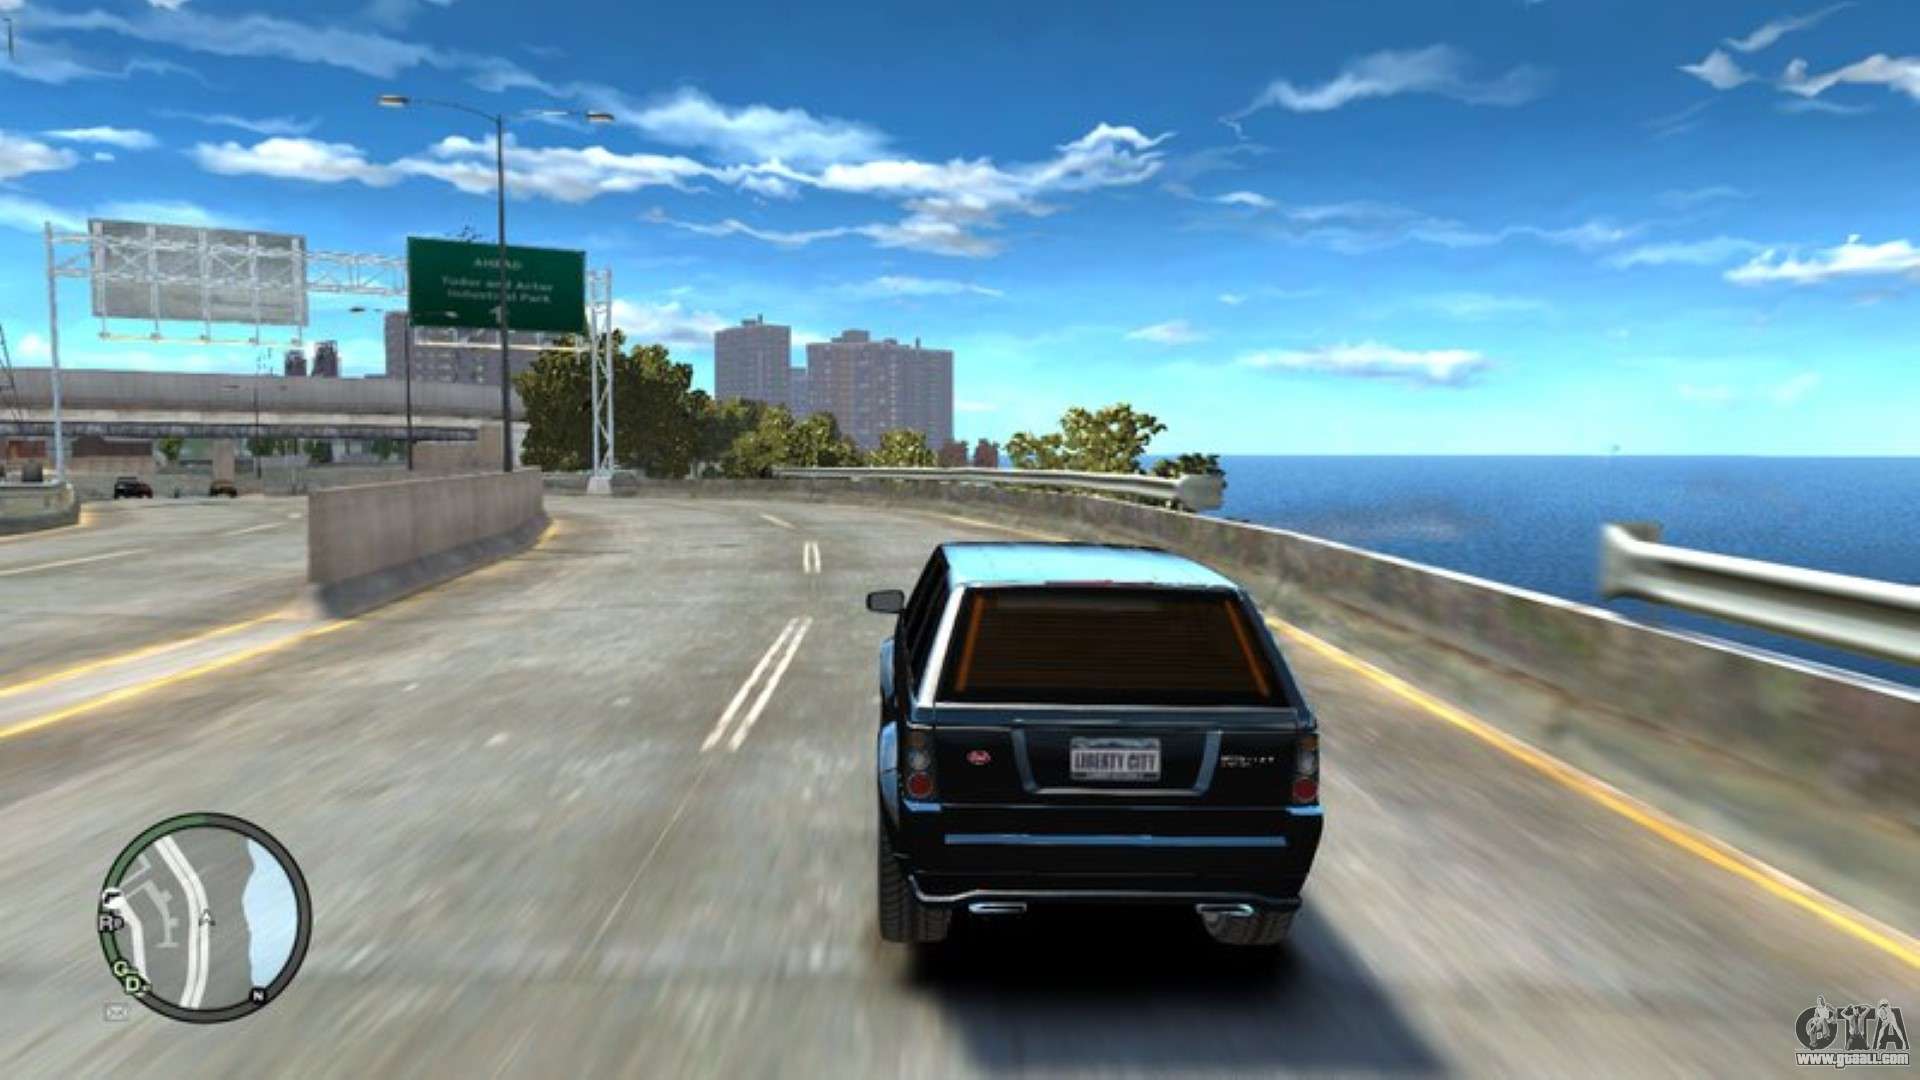 GTA 4 in 2022 with the BEST Graphics Mod (amazing) 